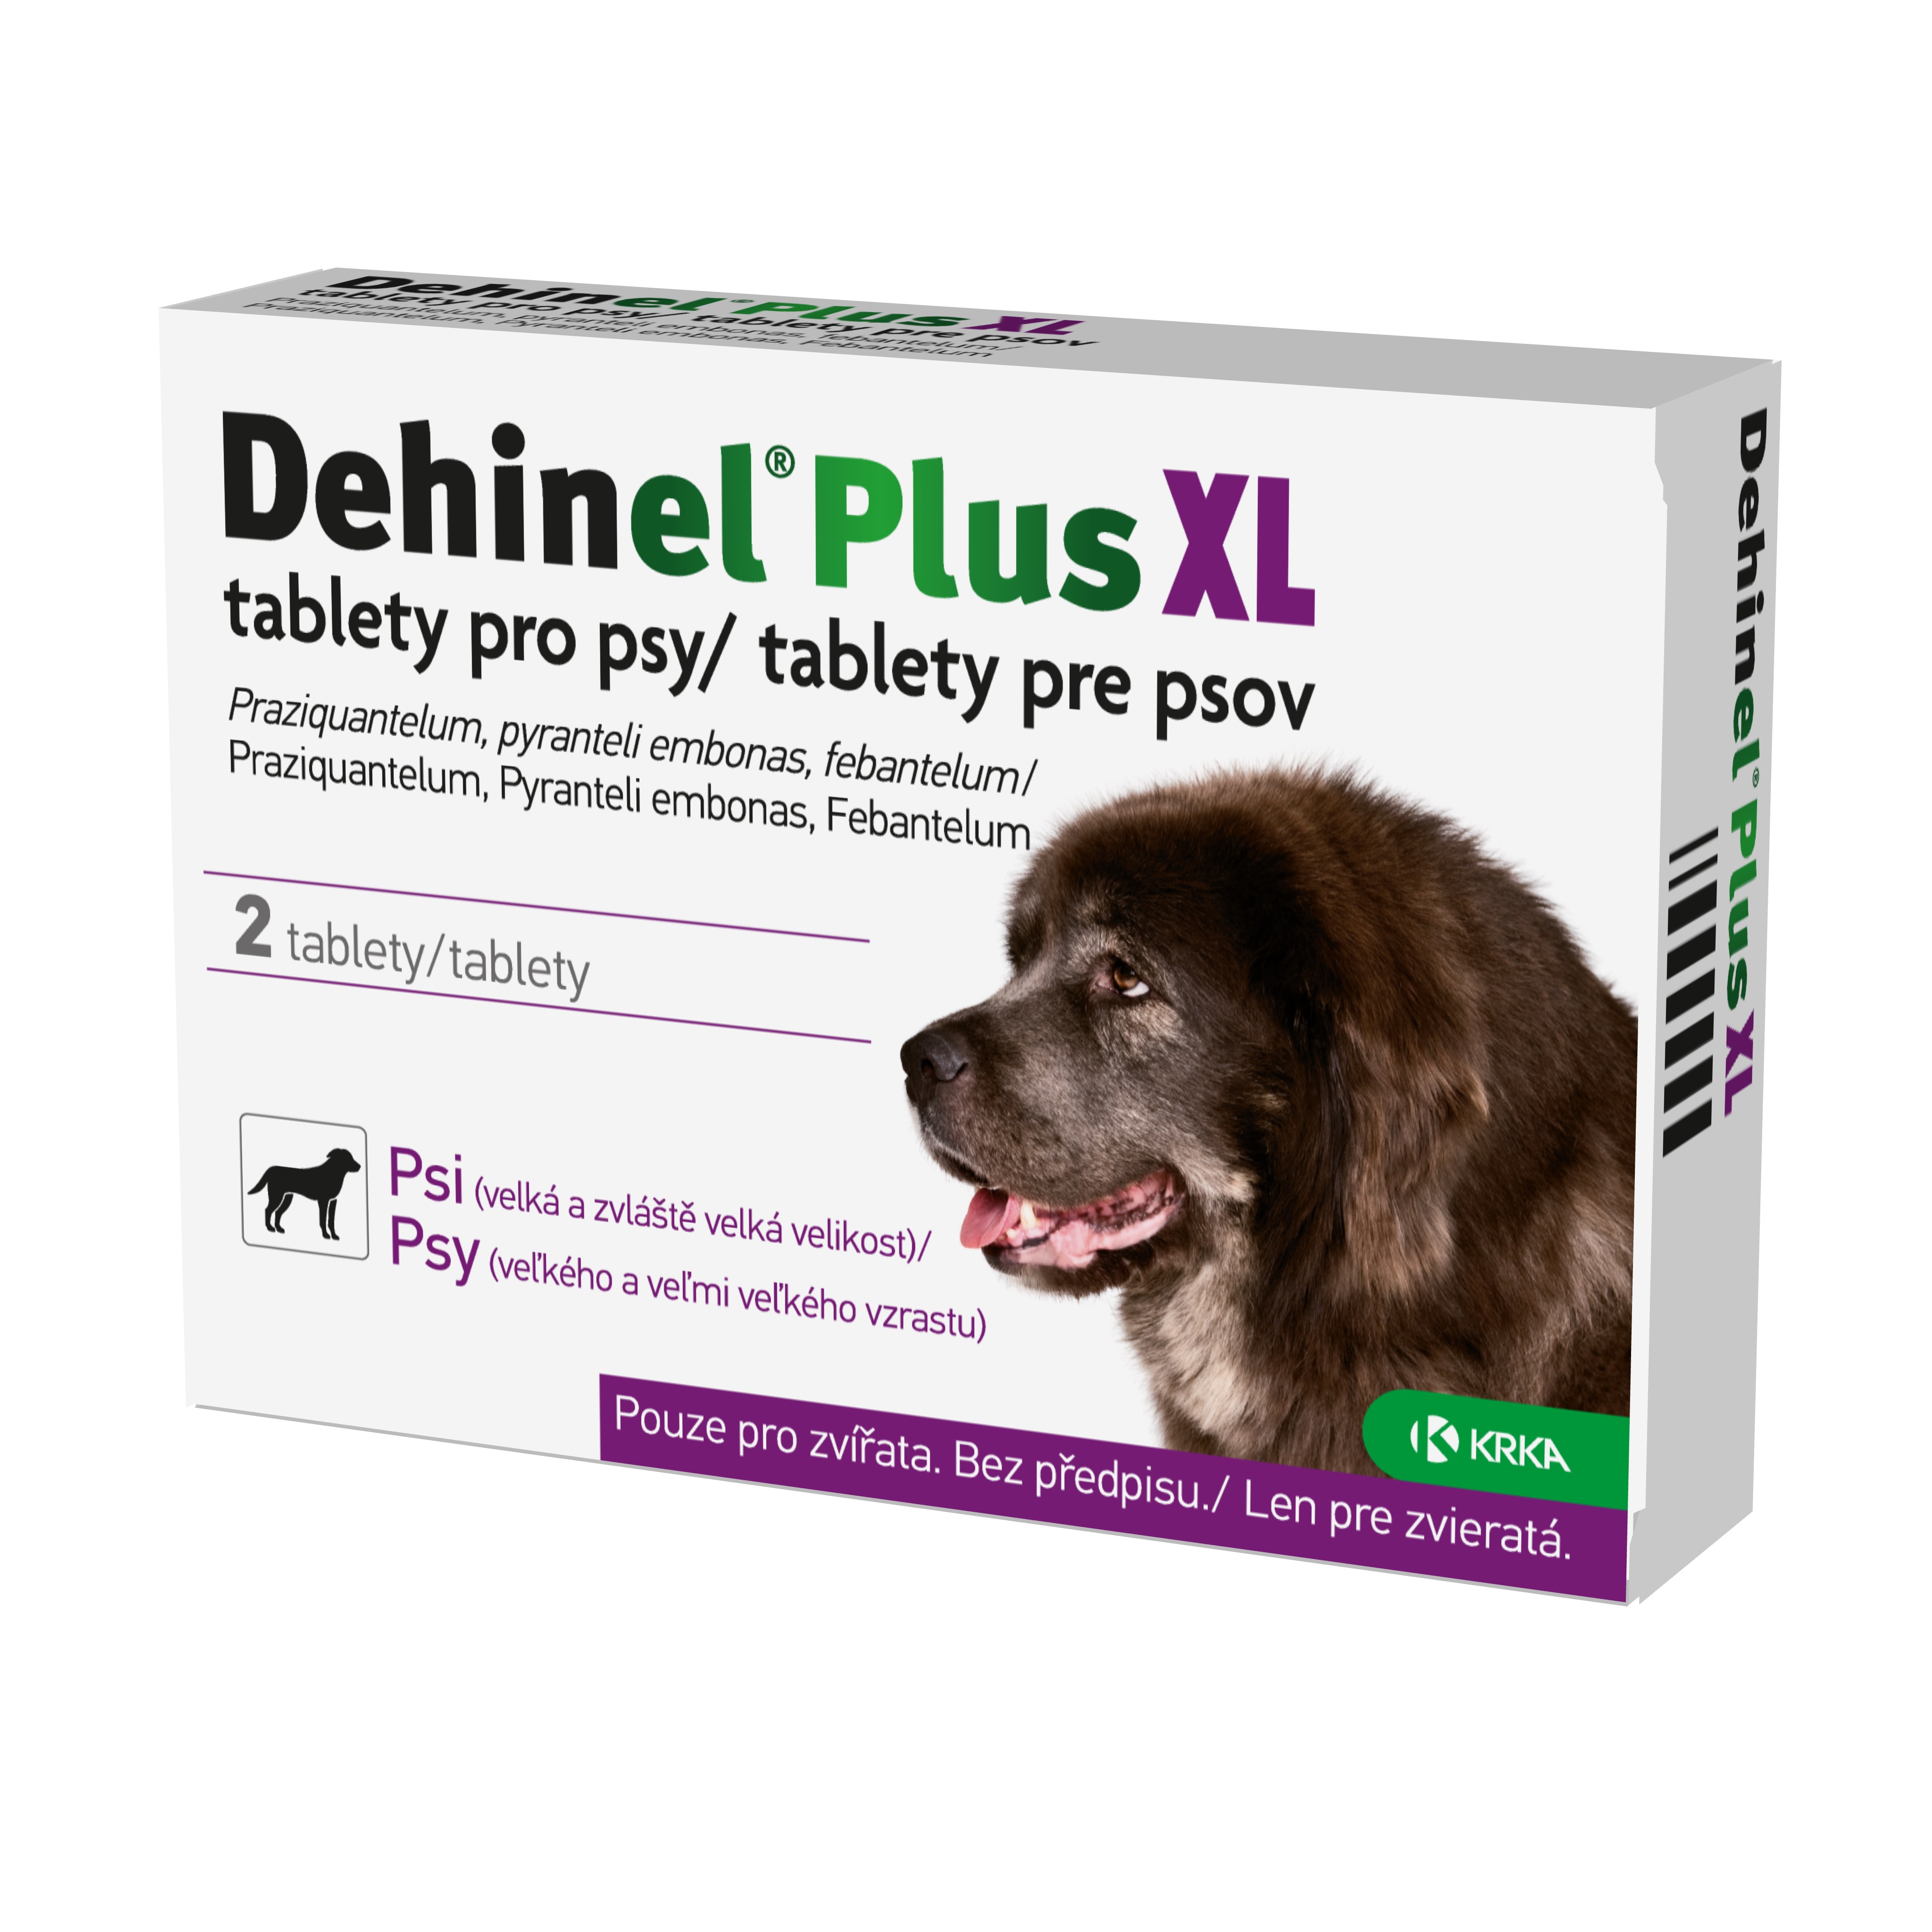 Dehinel Plus XL tablety pro psy 2 x 6 tablet